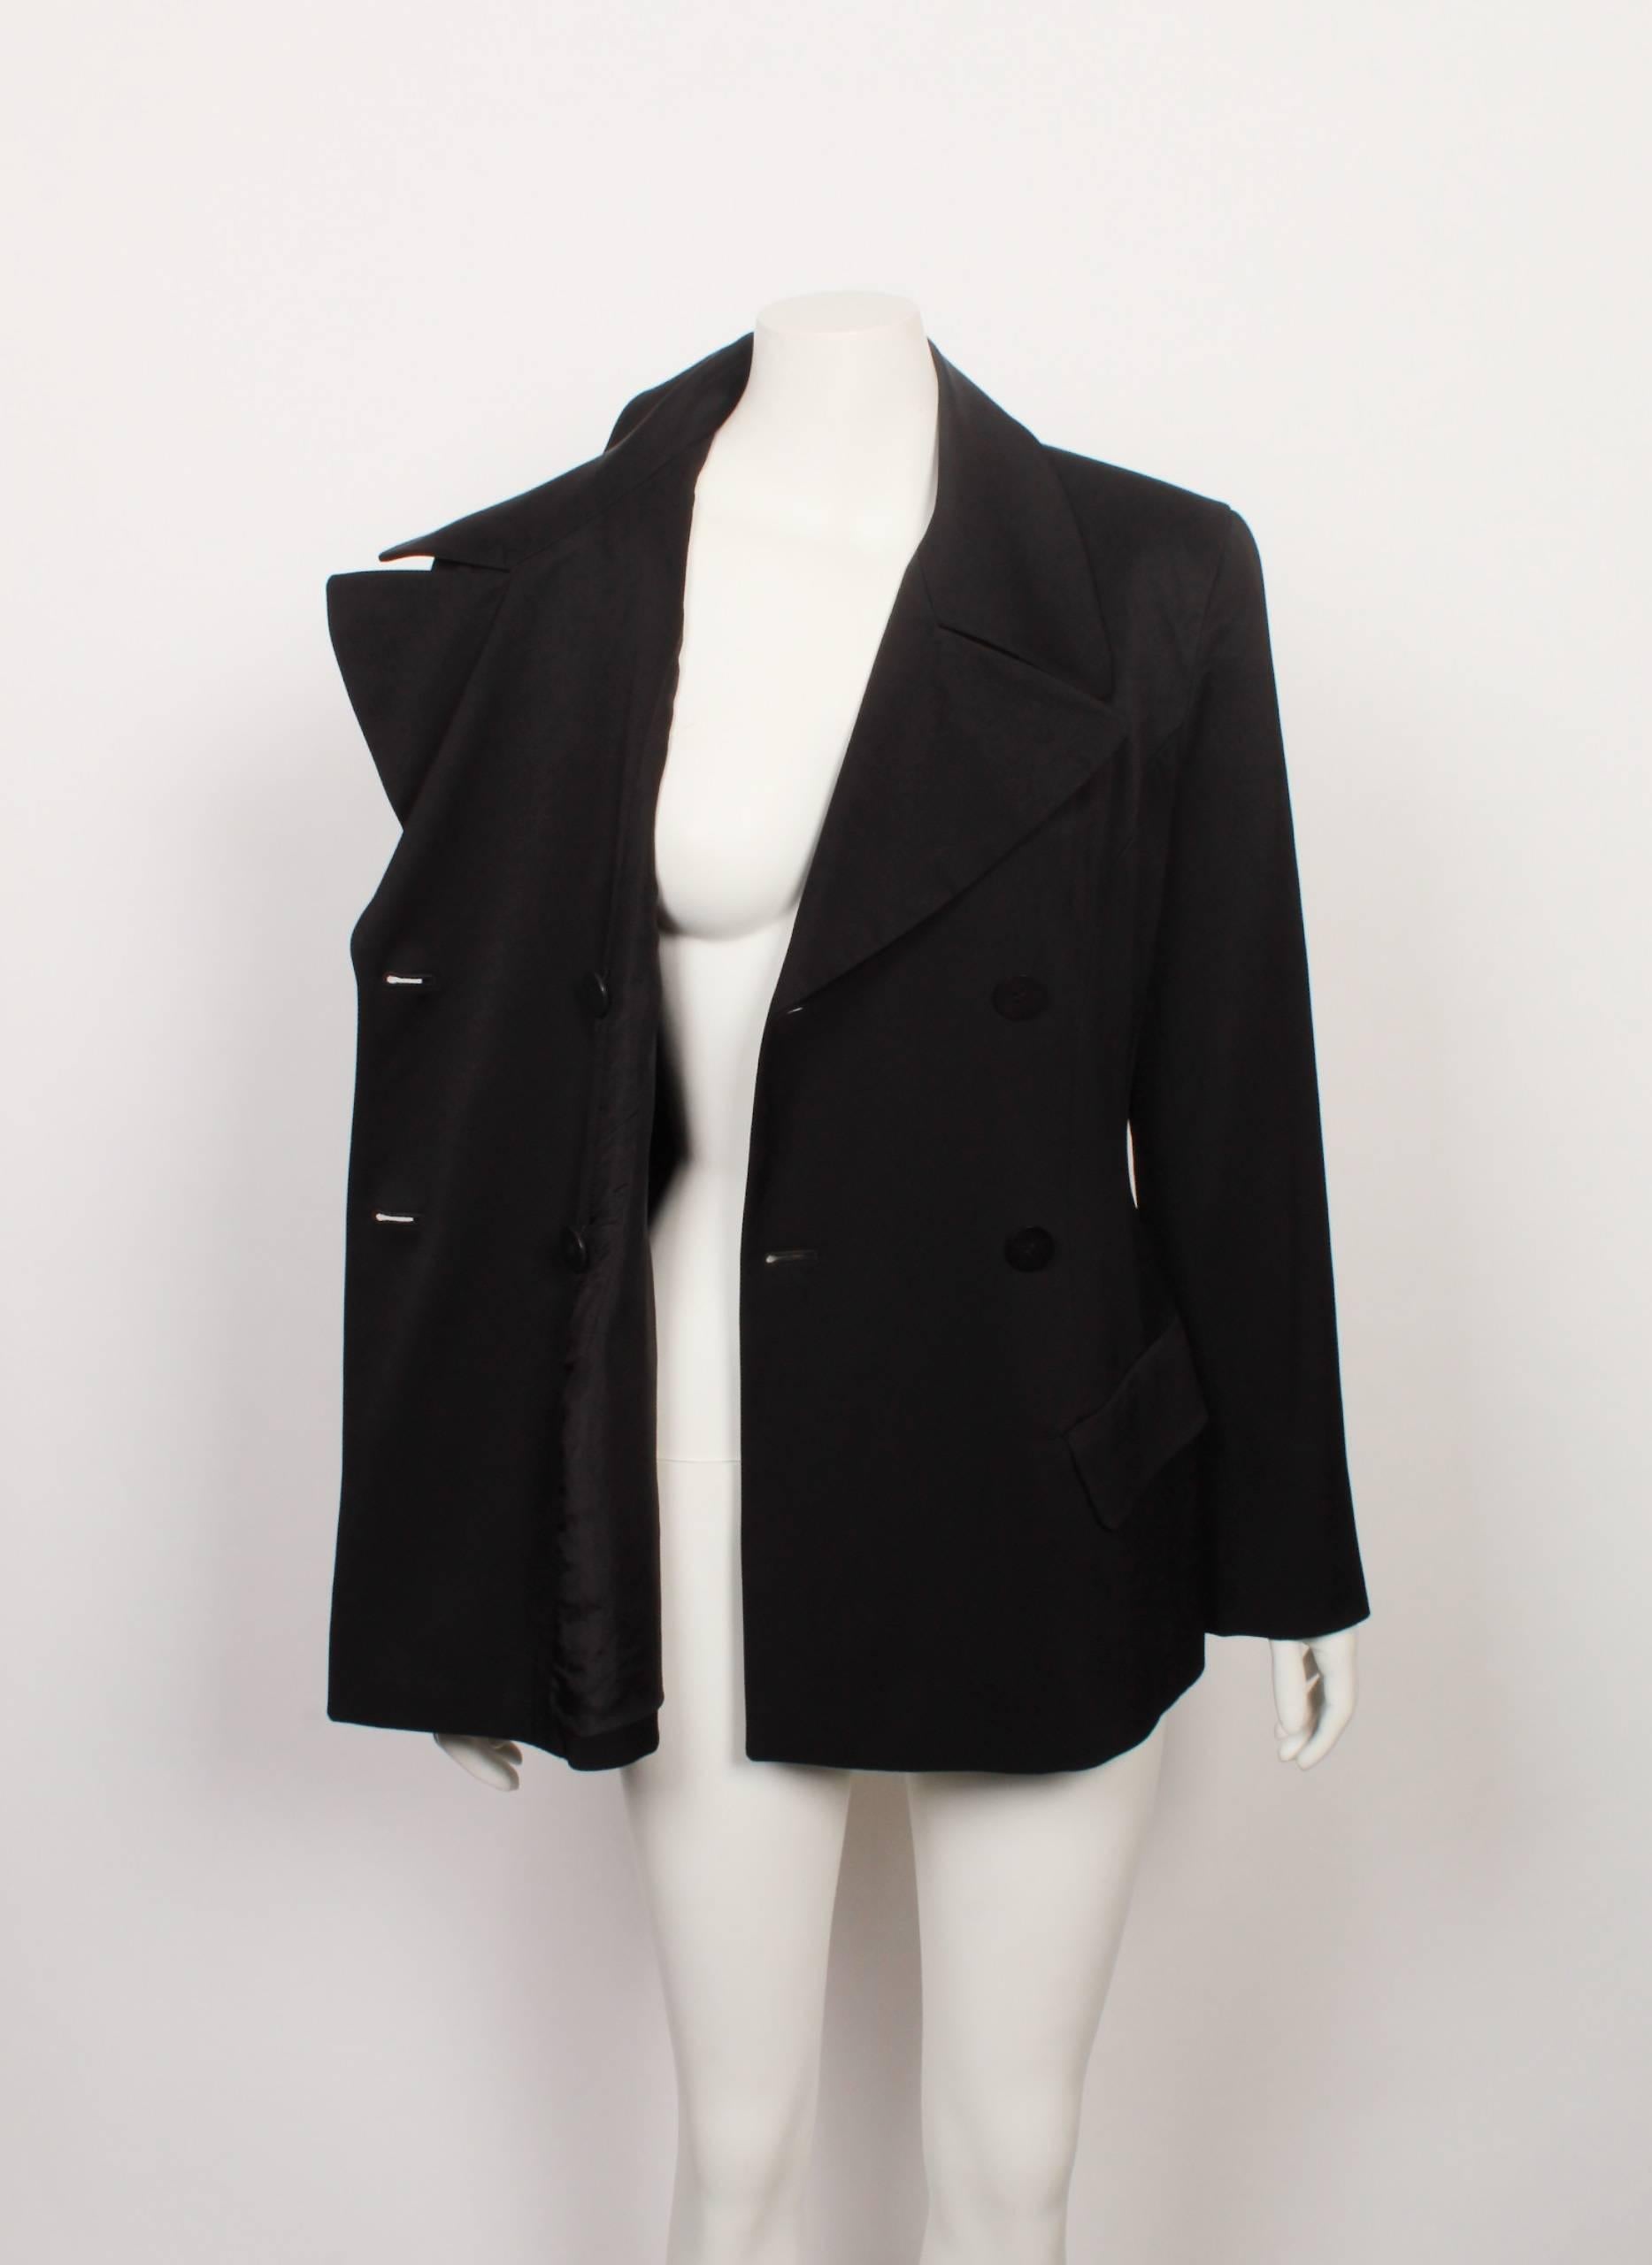 Donna Karan Black Double Breasted New York Blazer In Excellent Condition For Sale In Melbourne, Victoria